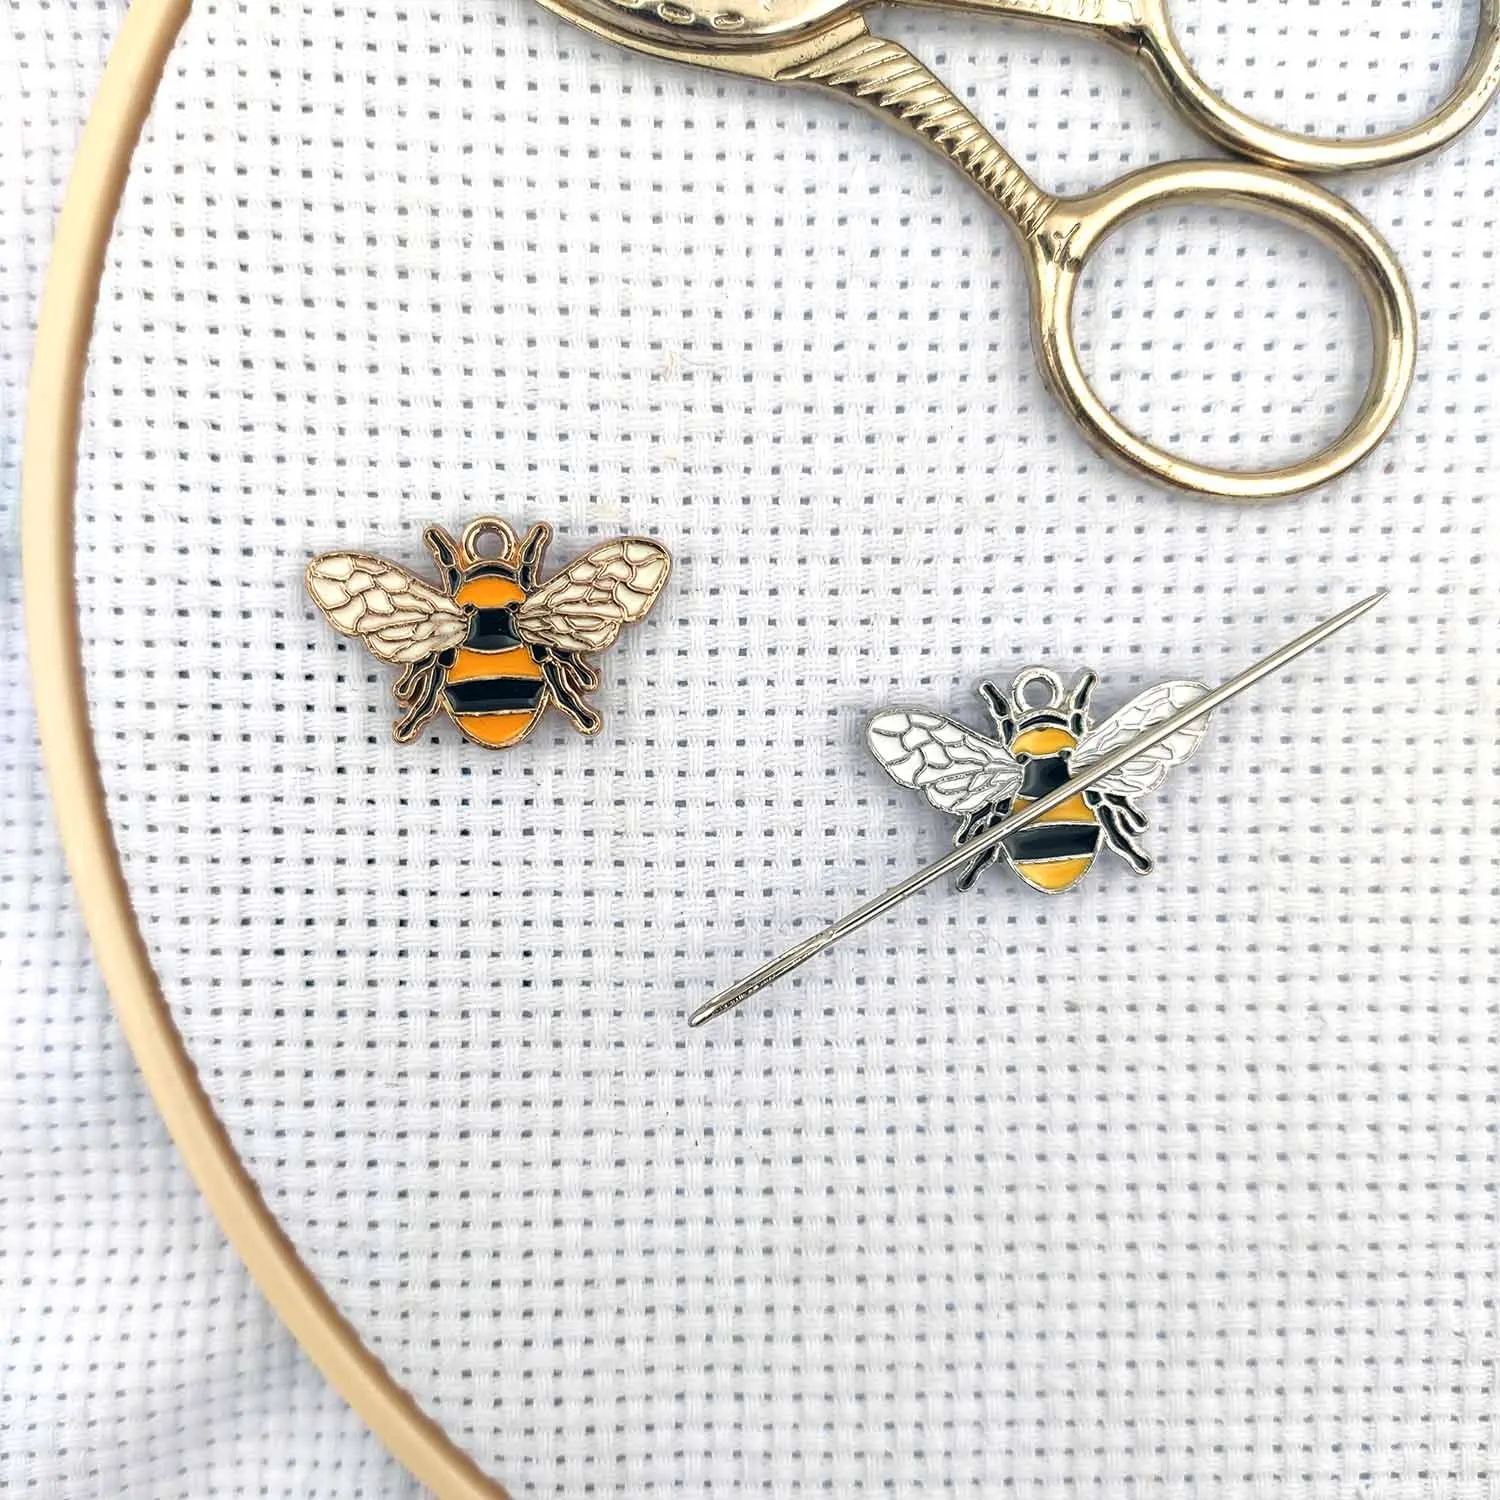 Magnetic Needle Minders Sewing Magnet Set of 2 Bees Needle Keeper Finder Embroidery Accessories Needle Nanny Holders Sew Gift